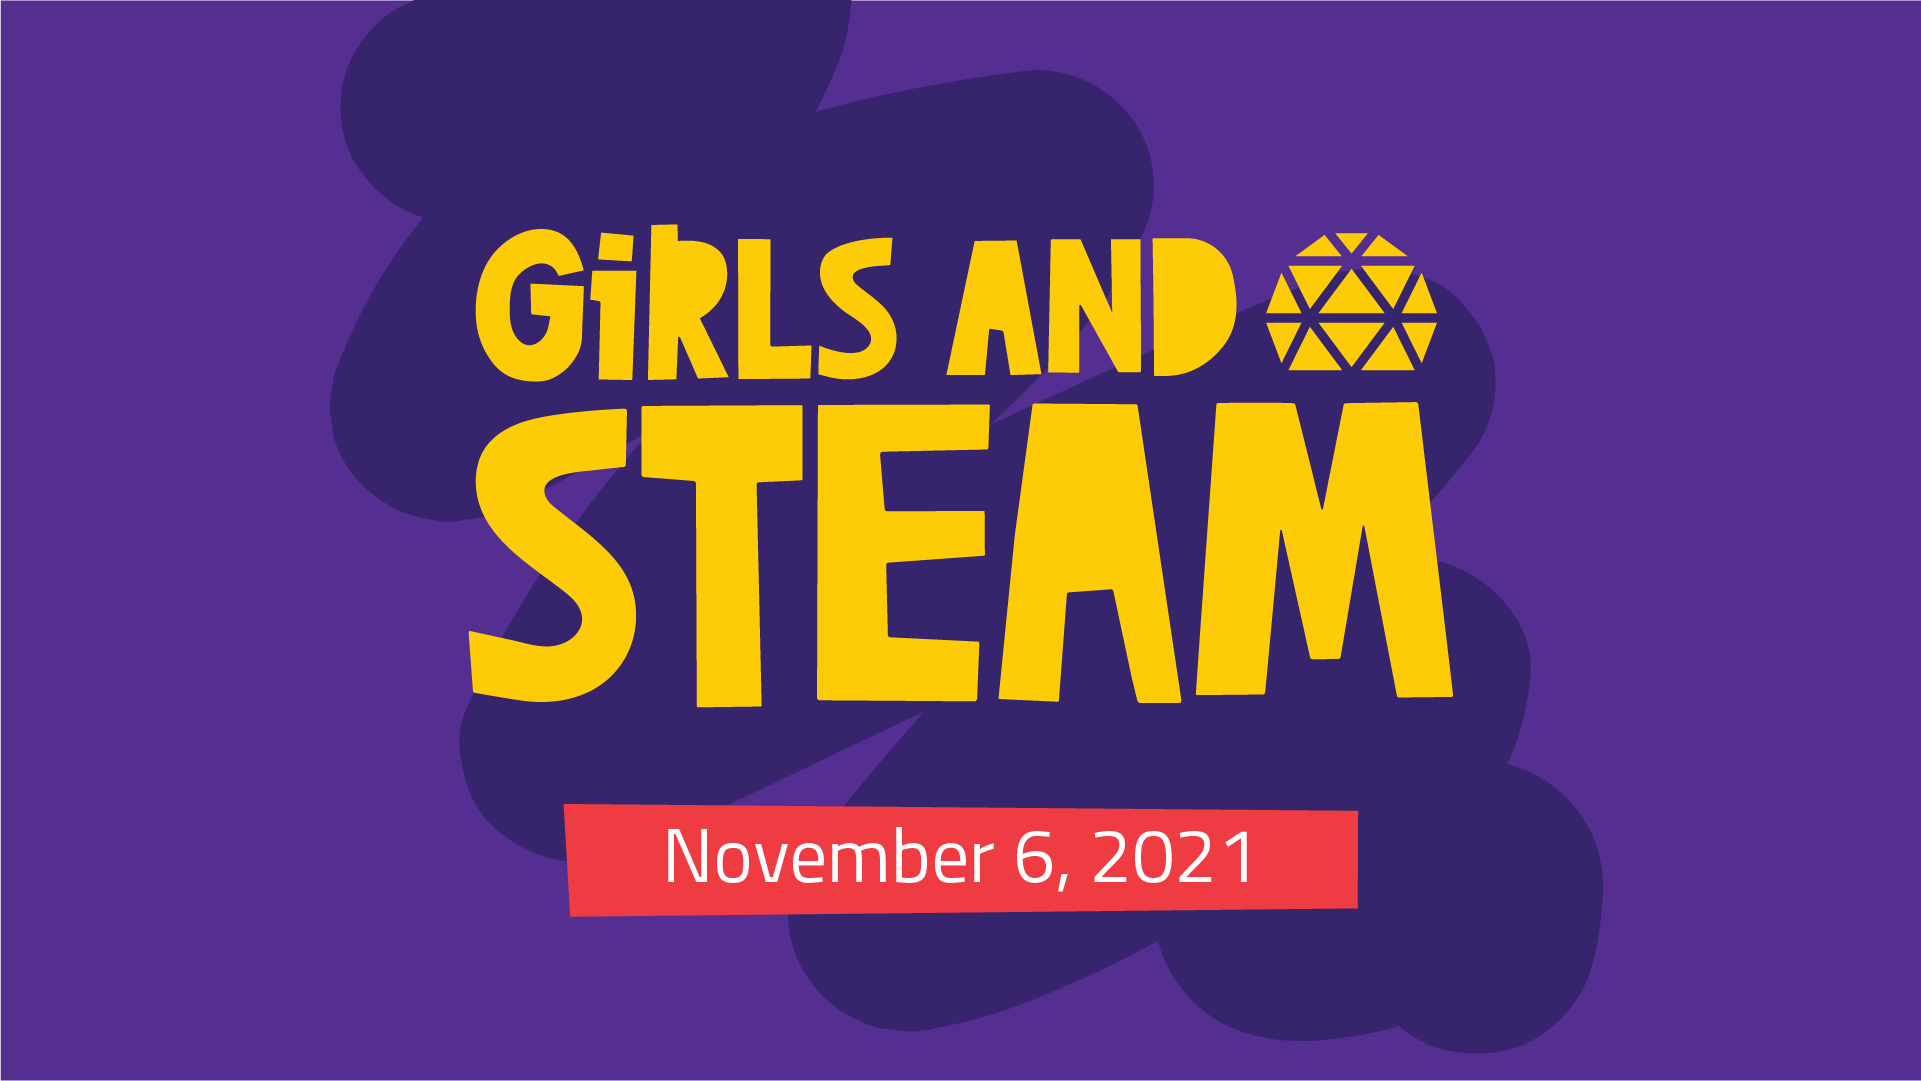 Girls and STEAM